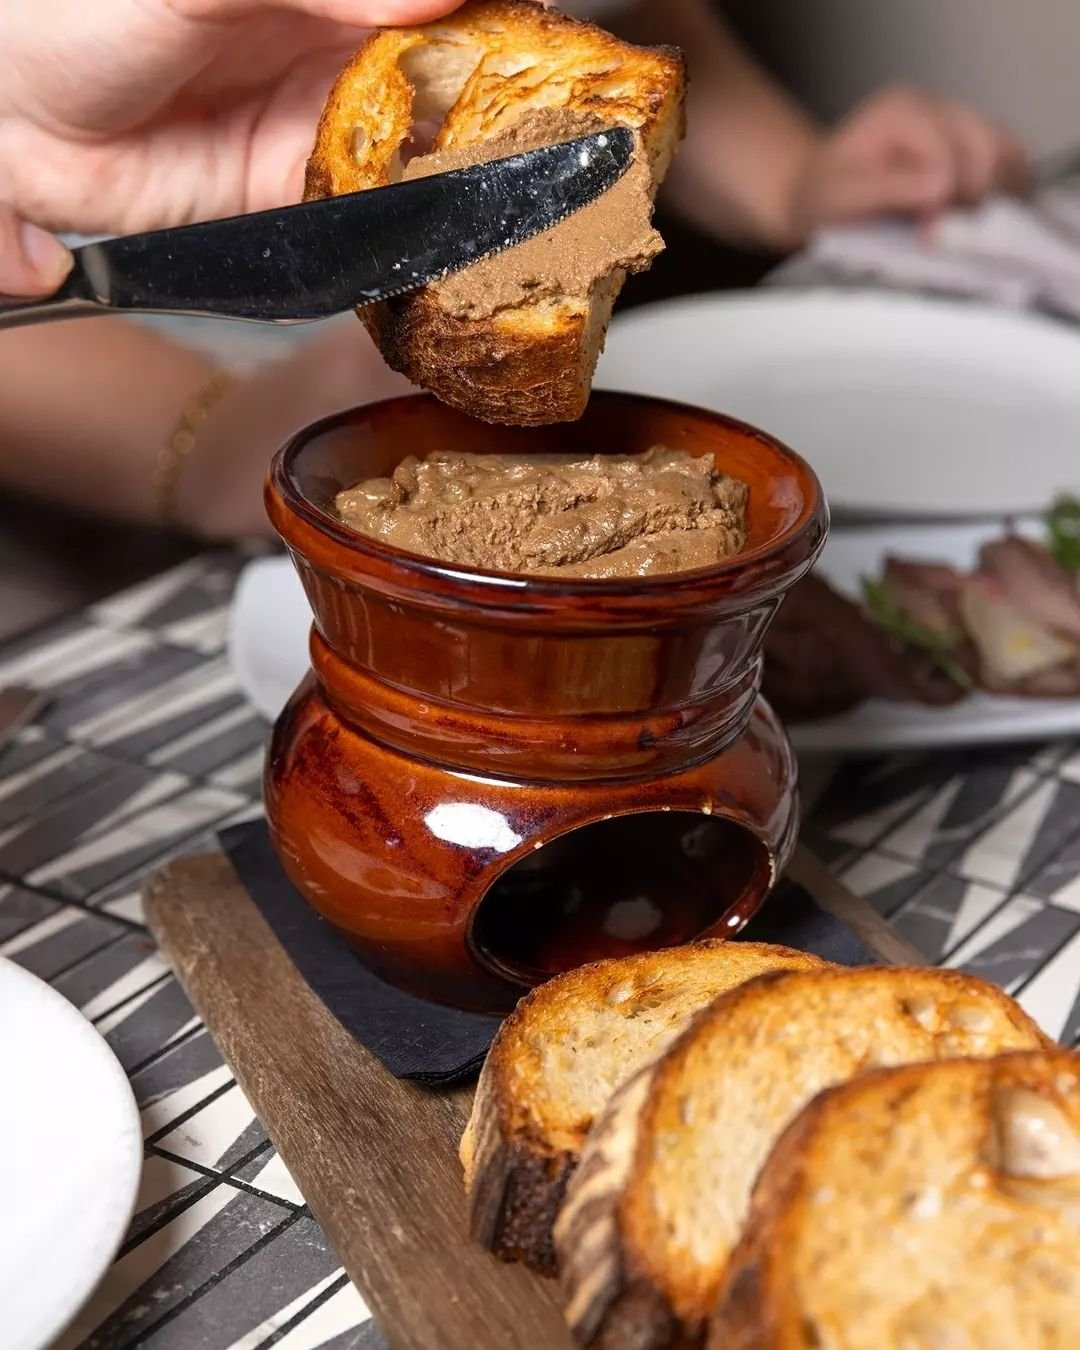 Our traditional Tuscan chicken liver p&acirc;t&eacute; is served warm. Spread generously over toasted bread.